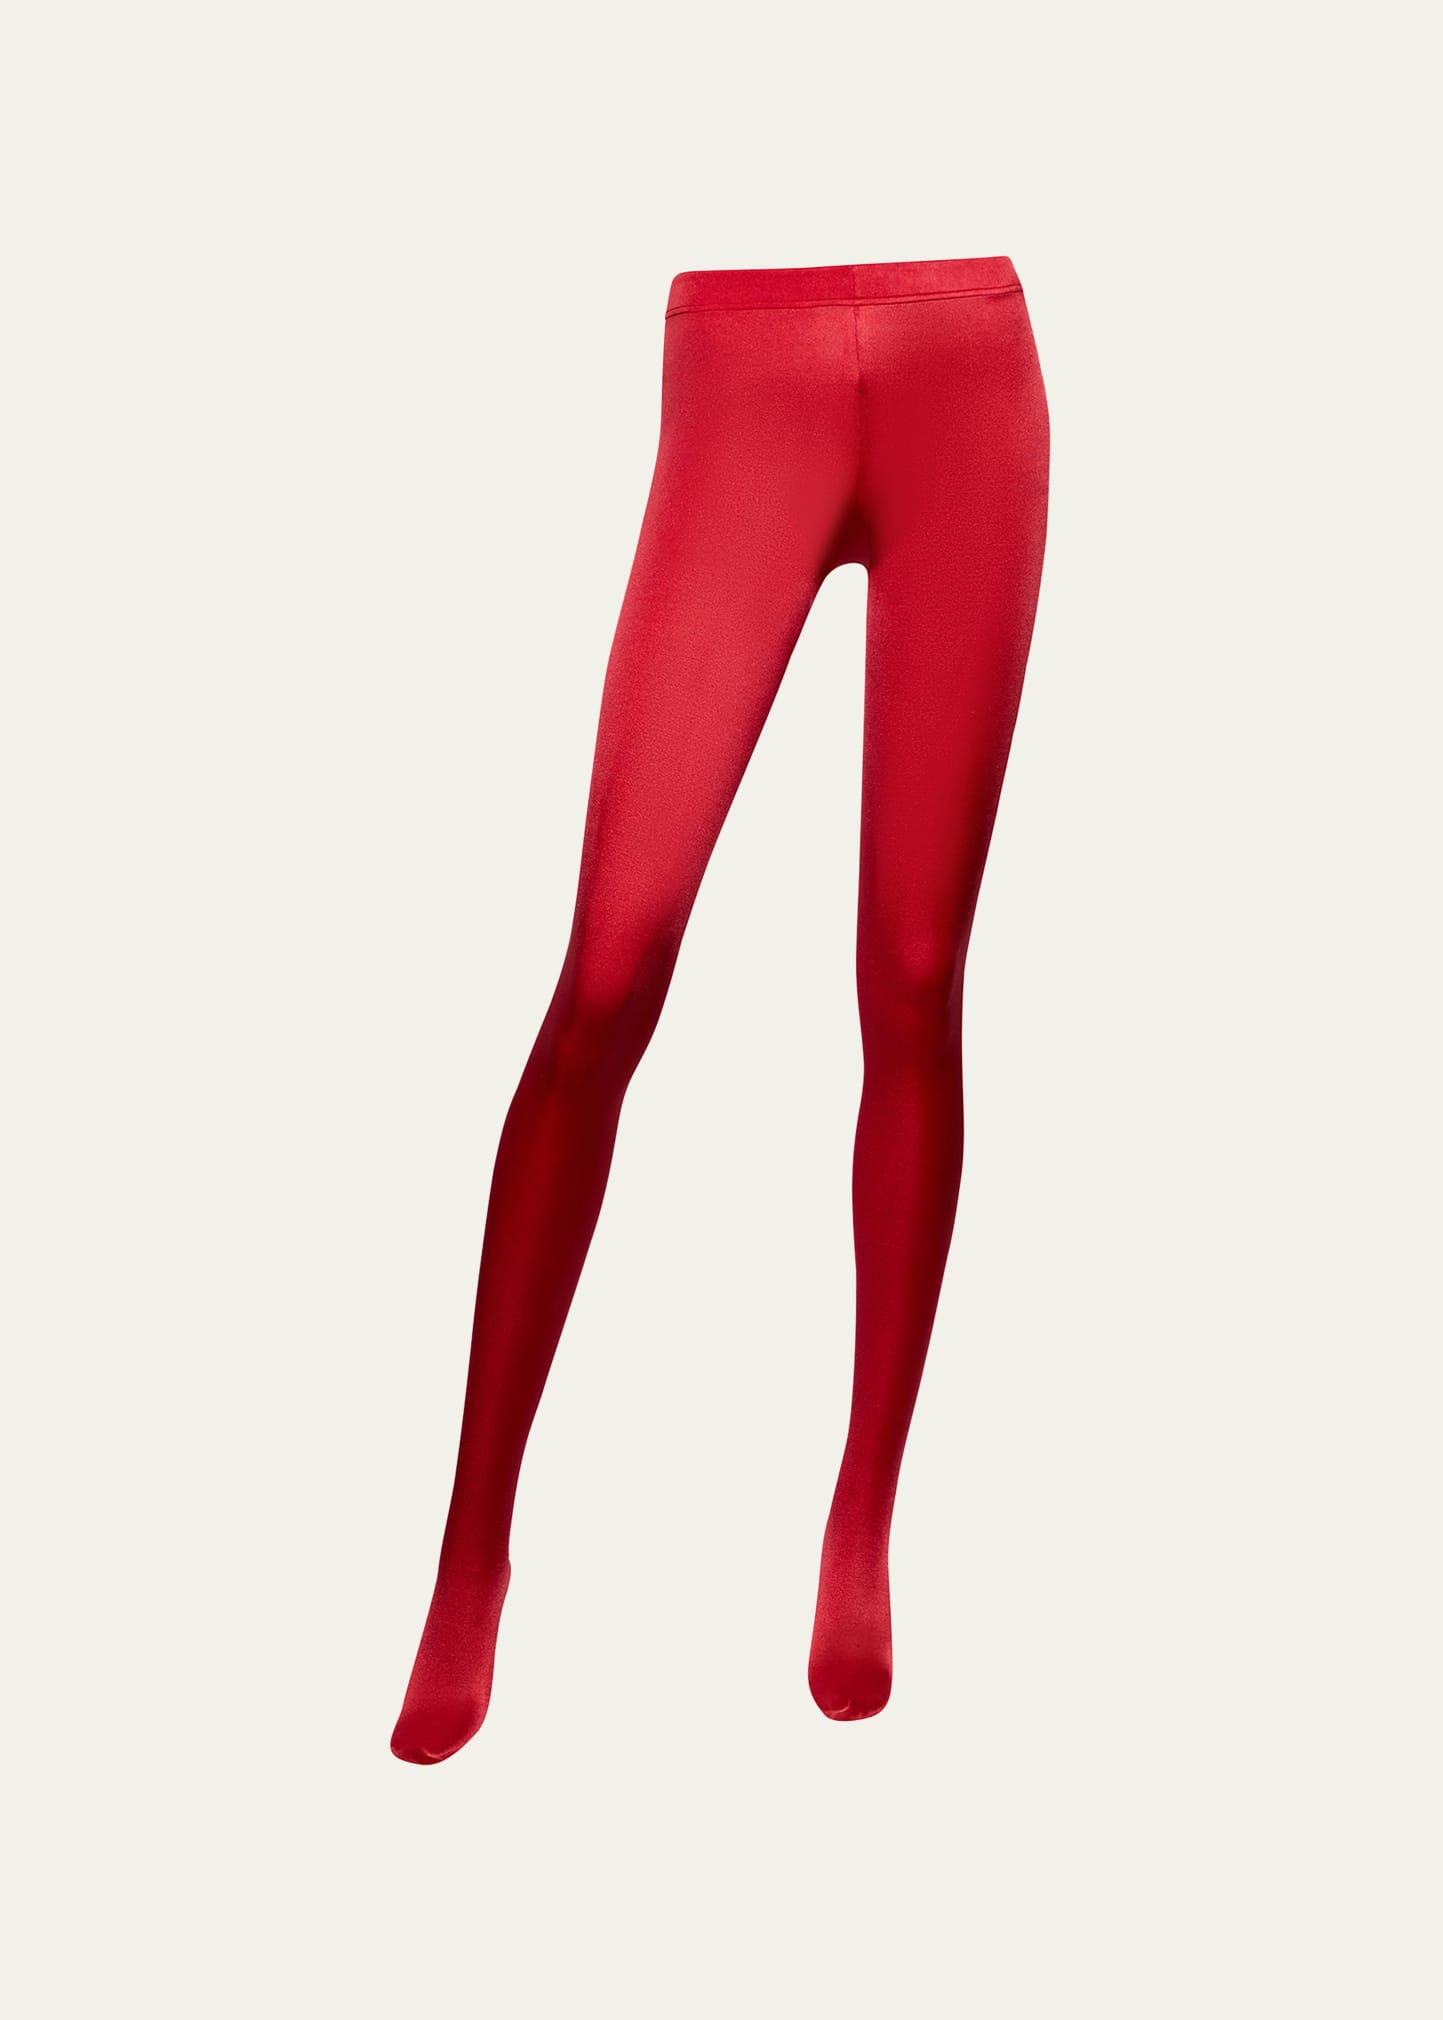 Wolford Pure 50 Basic Opaque Tights, $61, Neiman Marcus